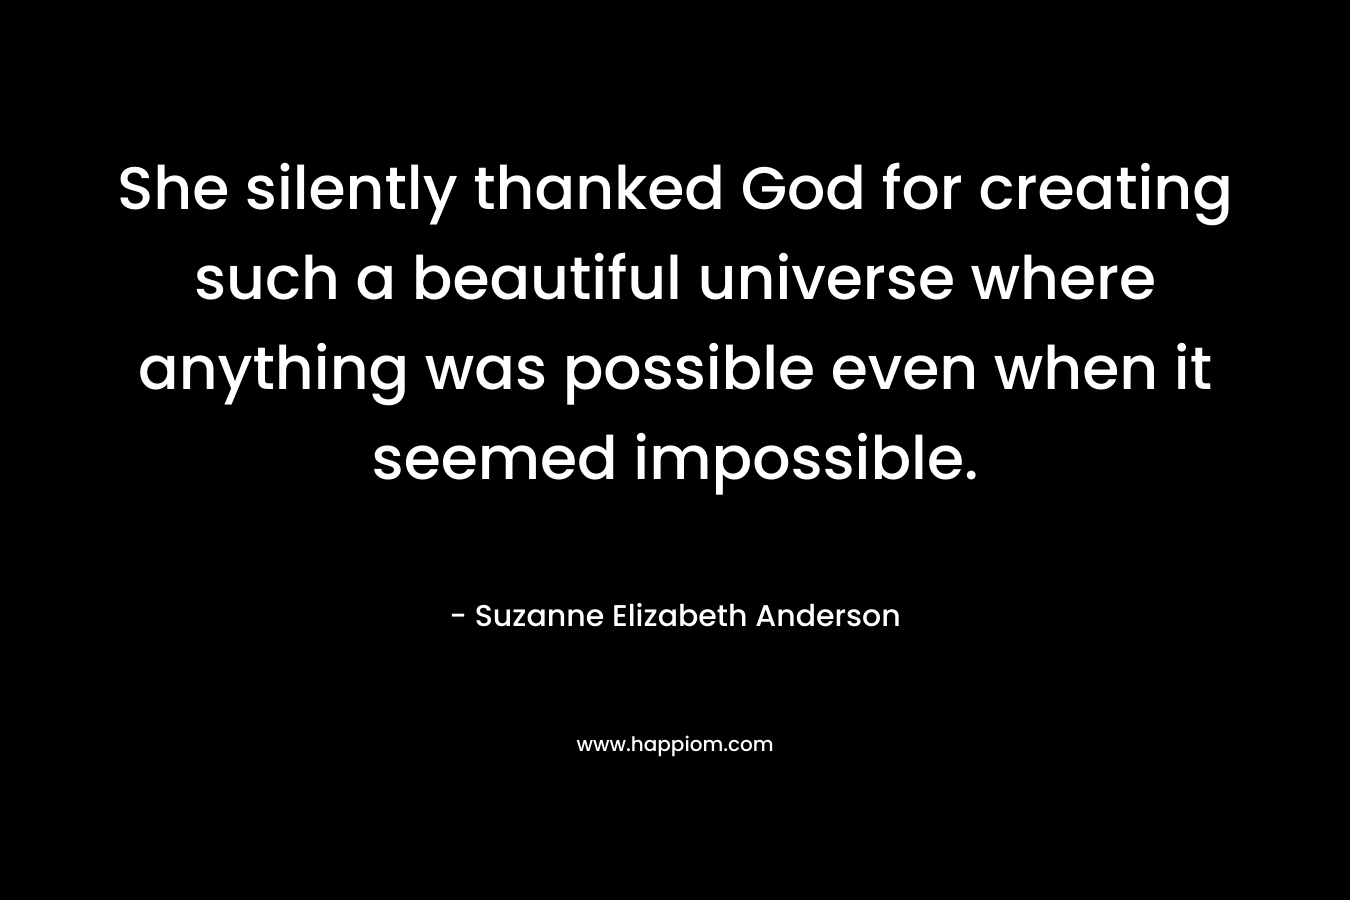 She silently thanked God for creating such a beautiful universe where anything was possible even when it seemed impossible.